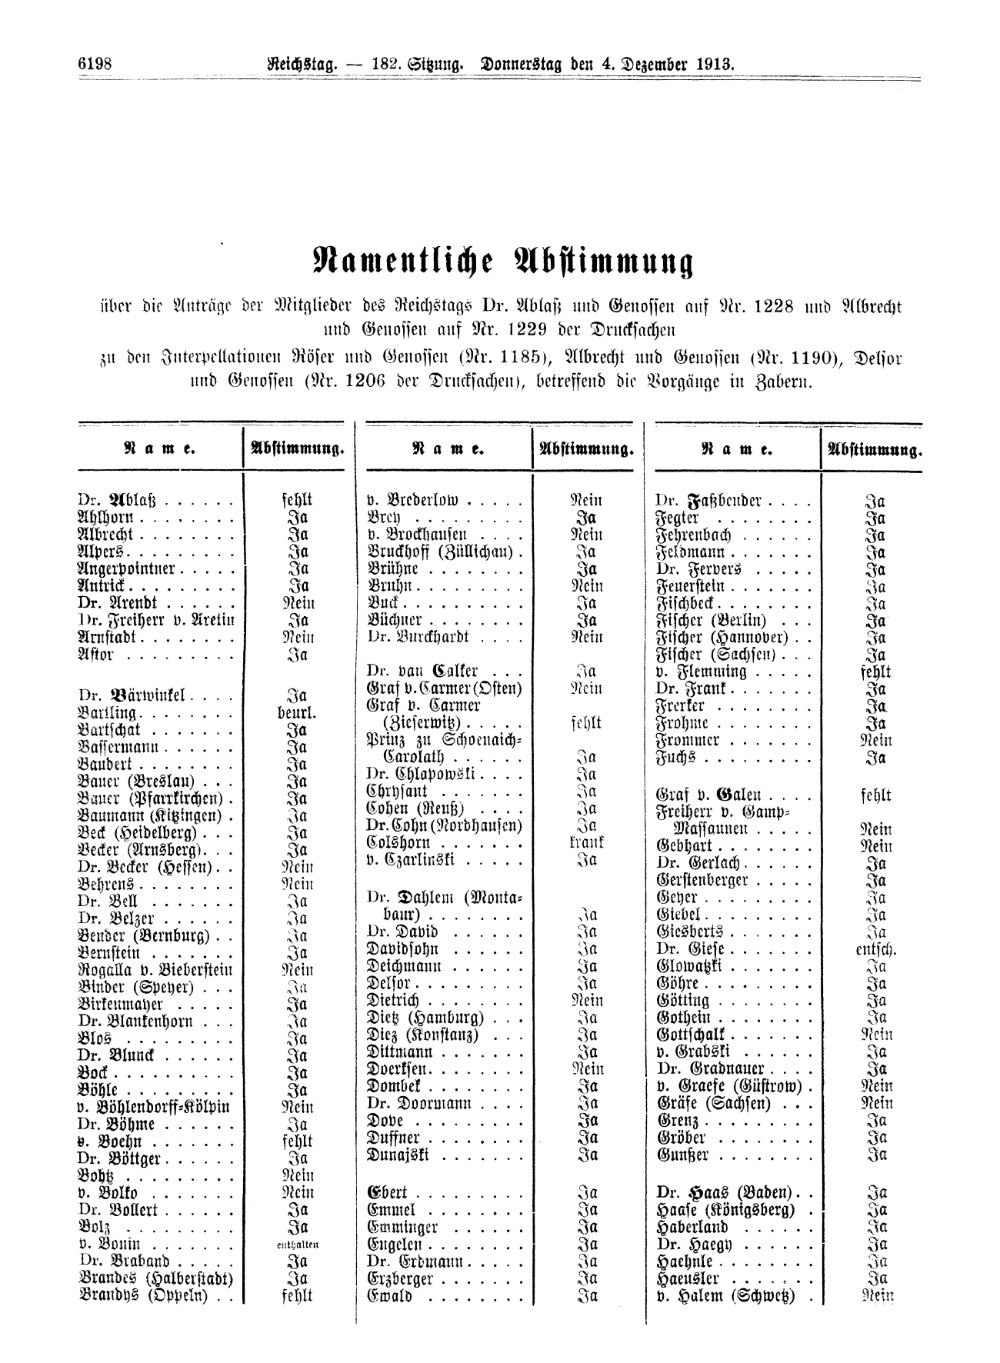 Scan of page 6198